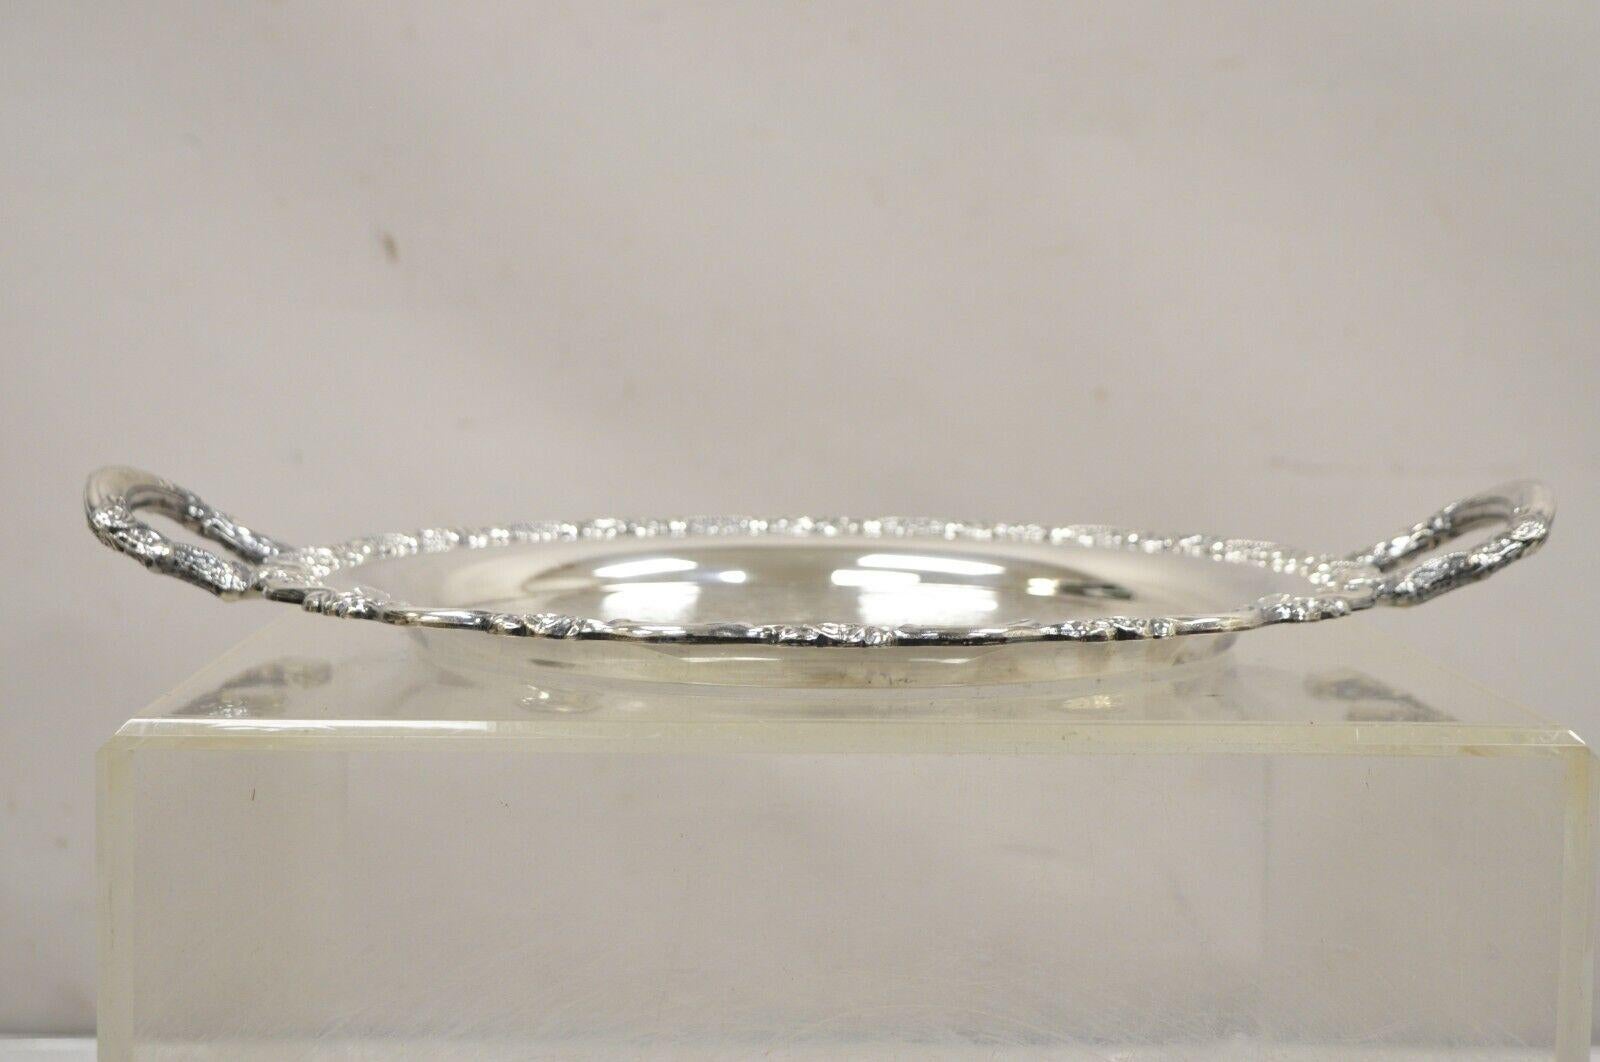 Vintage Oneida Victorian Style Round Silver Plated Serving Platter Tray with Raised Handles. Circa Mid to Late 20th Century.
Measurements:  2